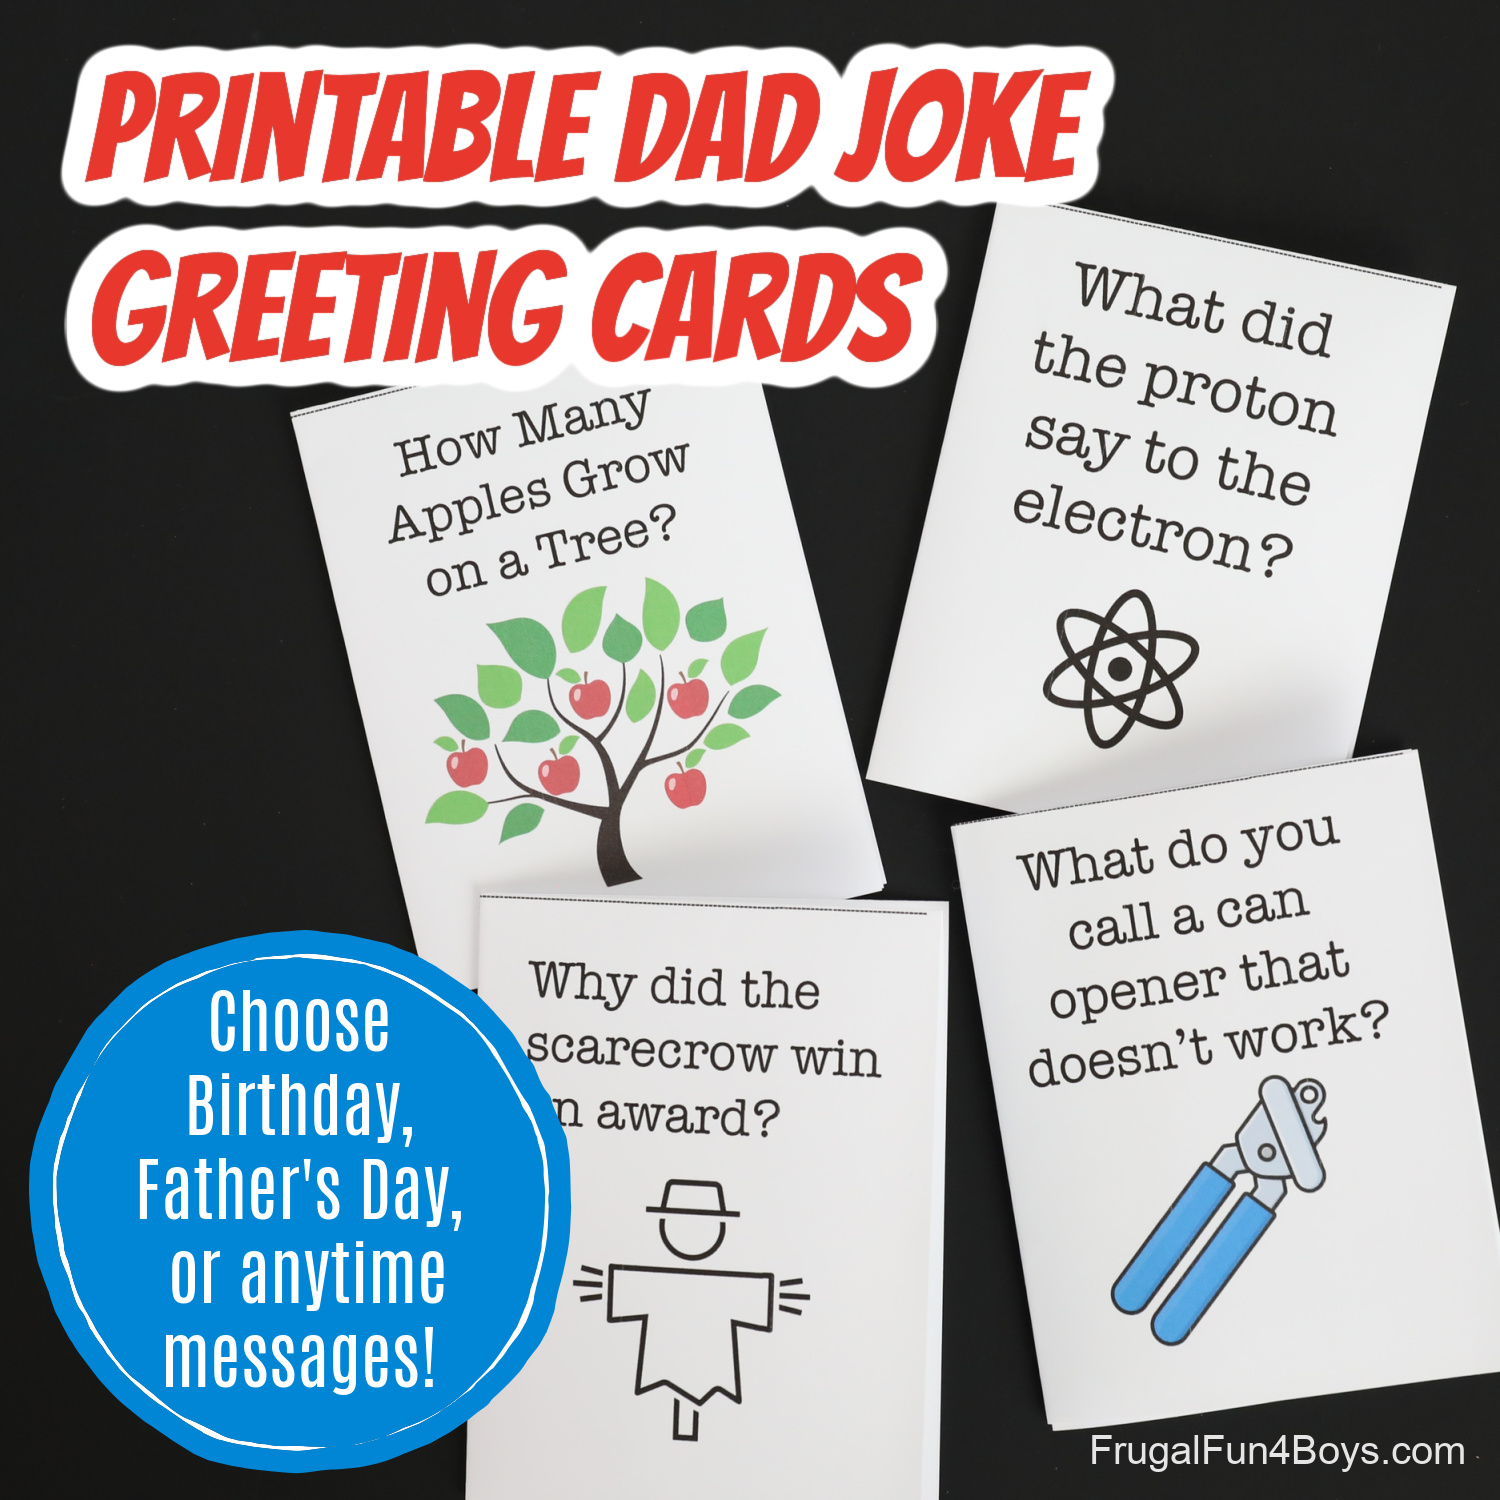 Printable Dad Jokes Greeting Cards - Frugal Fun For Boys and Girls